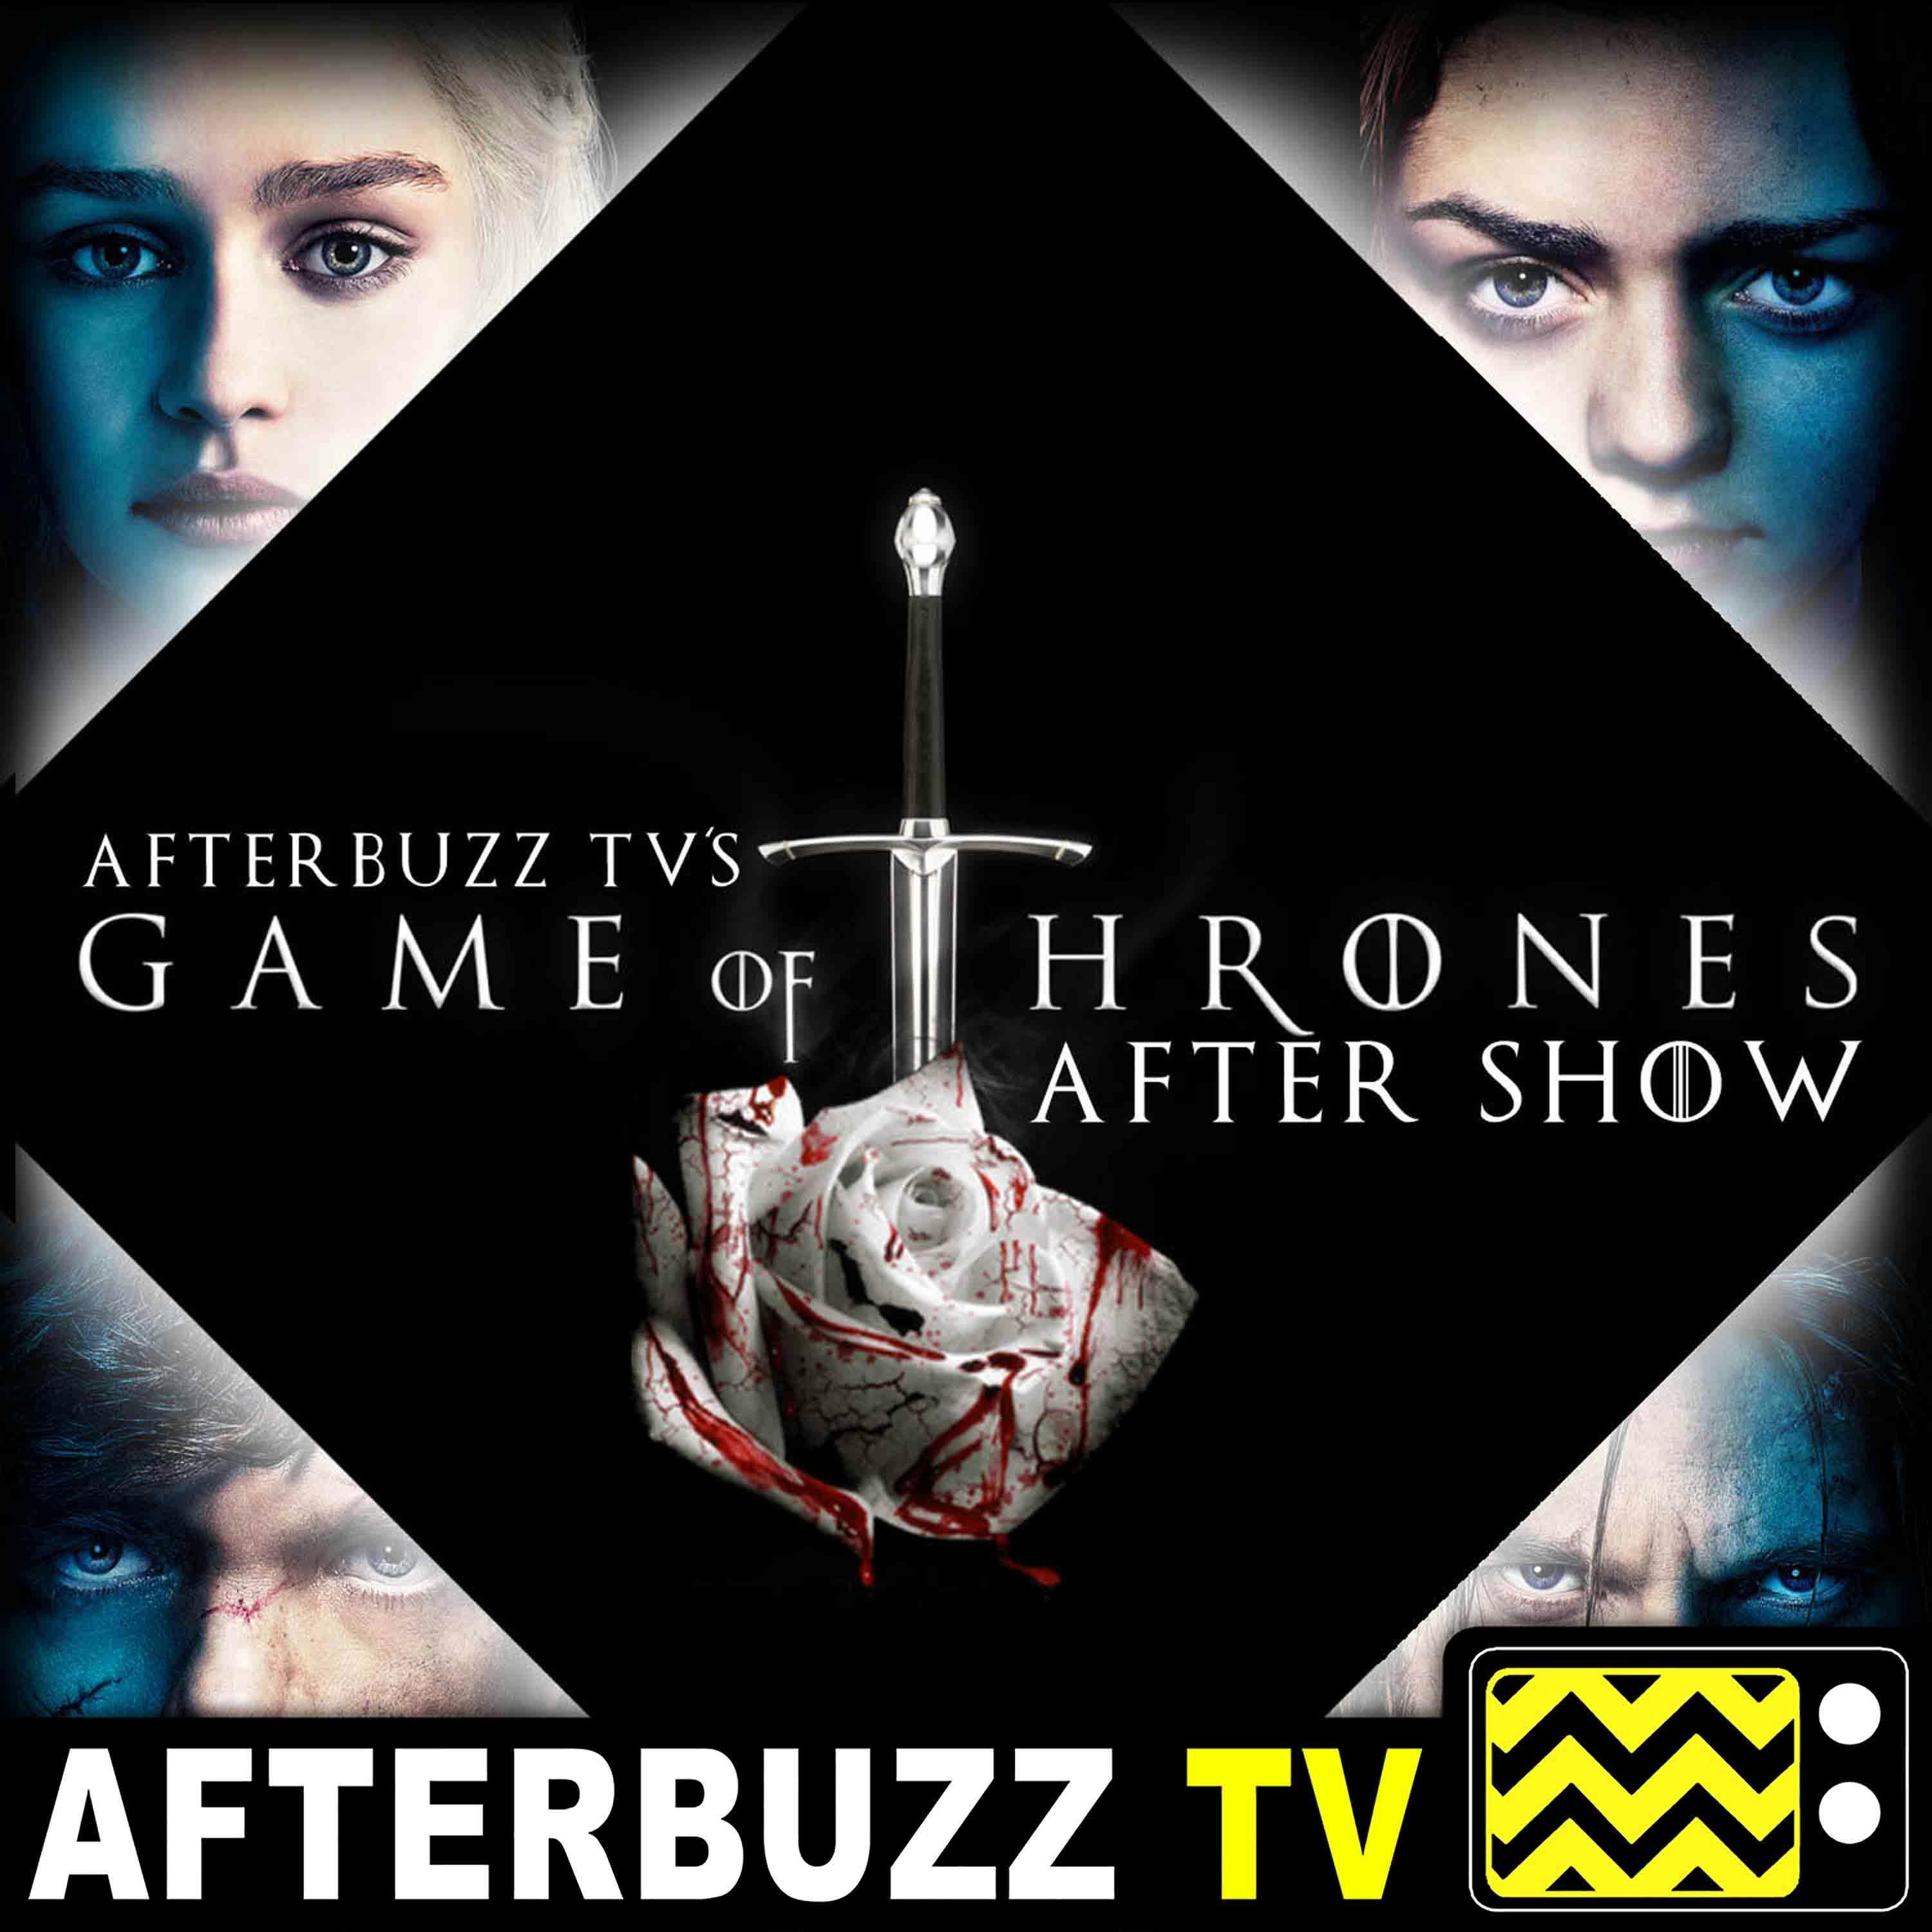 Game of Thrones S:1 | A Golden Crown; You Win or You Die E:6 & E:7 | AfterBuzz TV AfterShow